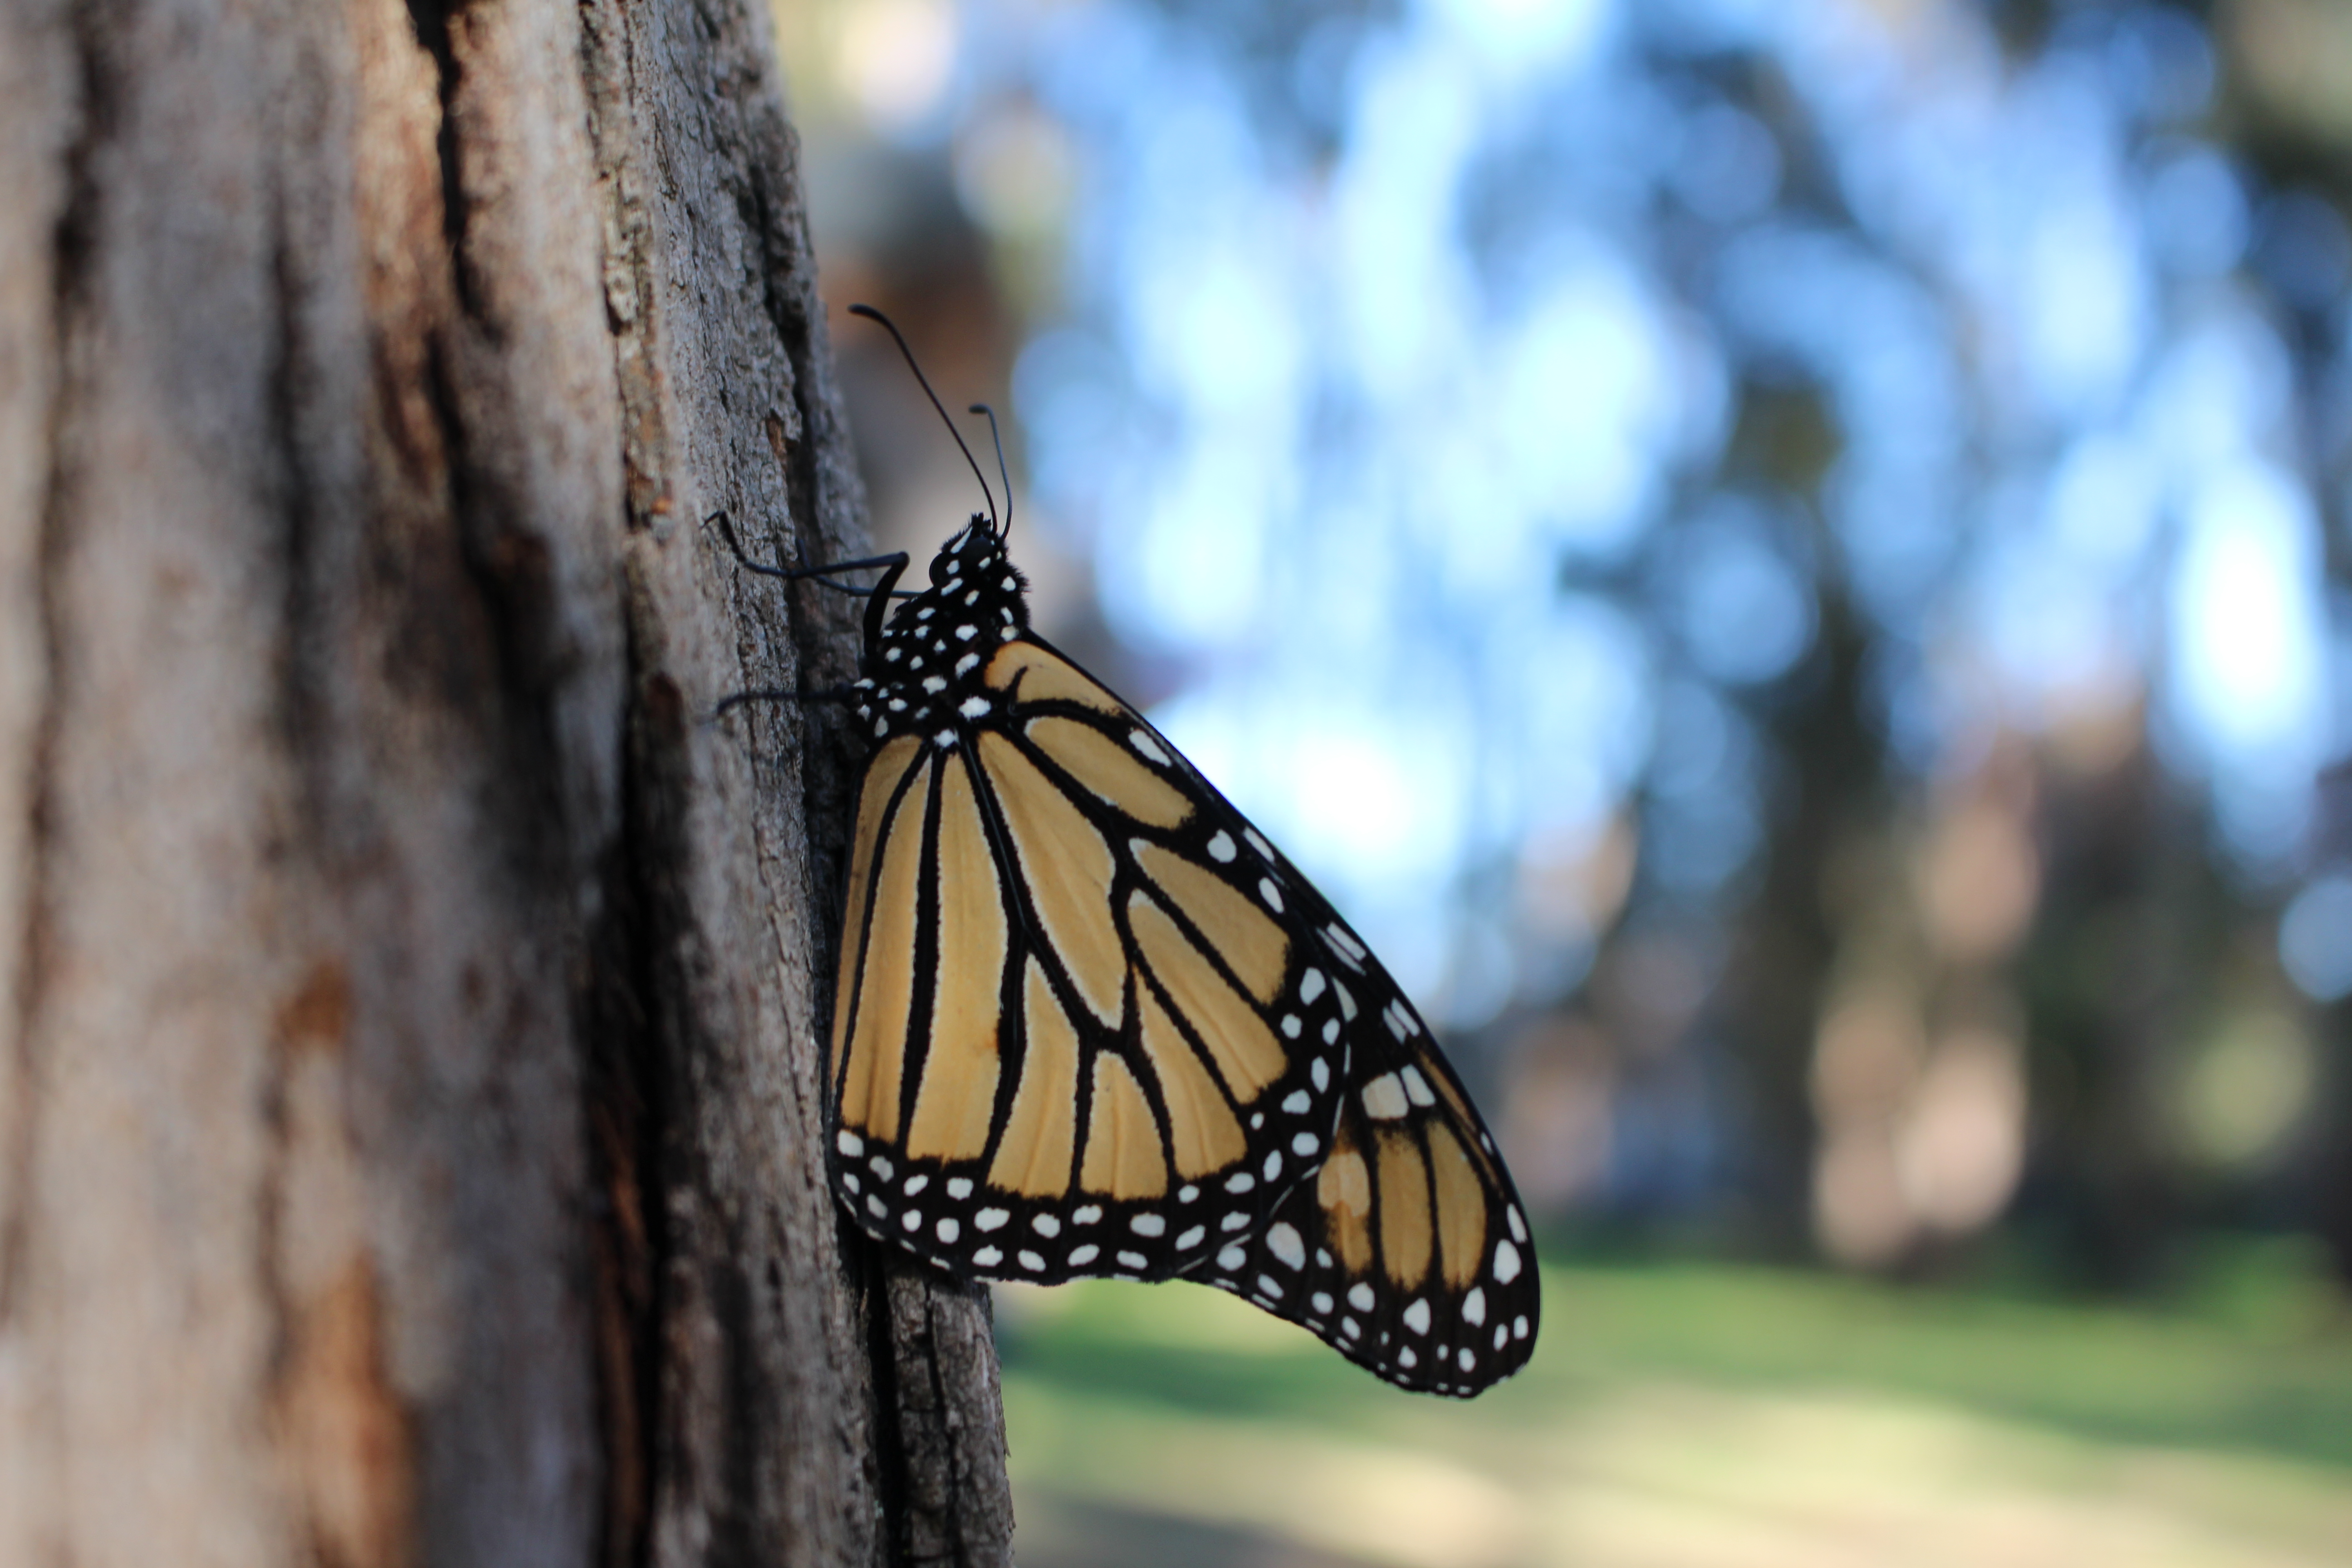 A monarch clings to a tree trunk, in a dimly-lit landscape.